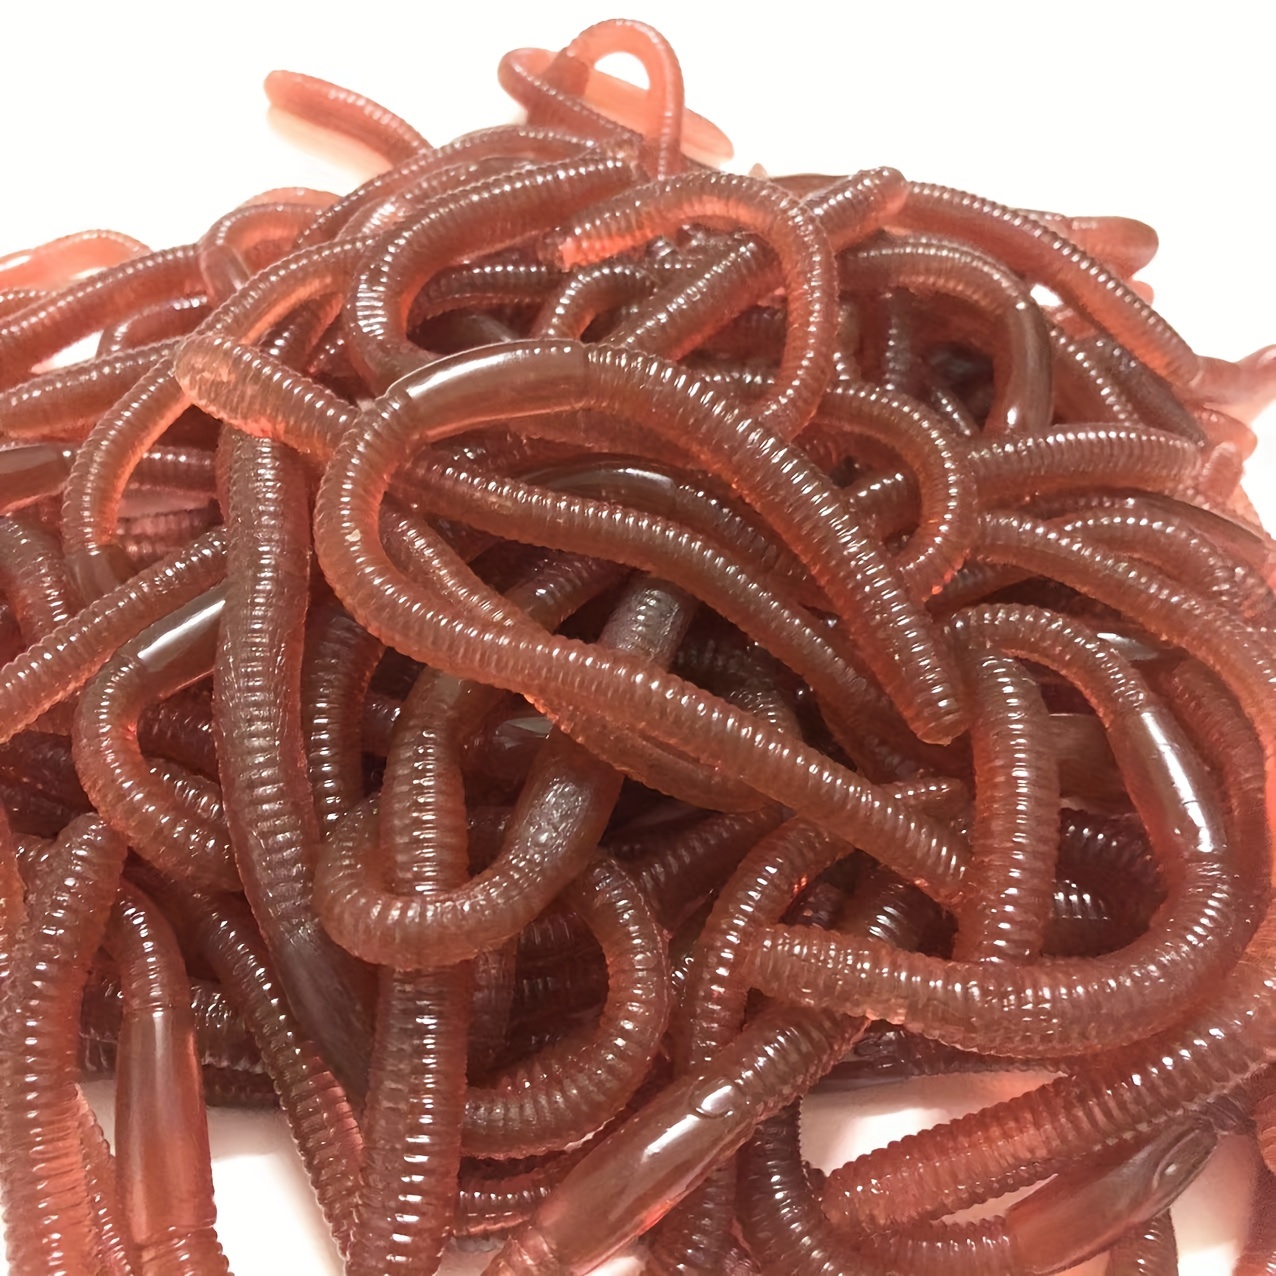 80Pcs/Pack Soft Earthworm Bait, Artificial Red Worms Fishing Lures